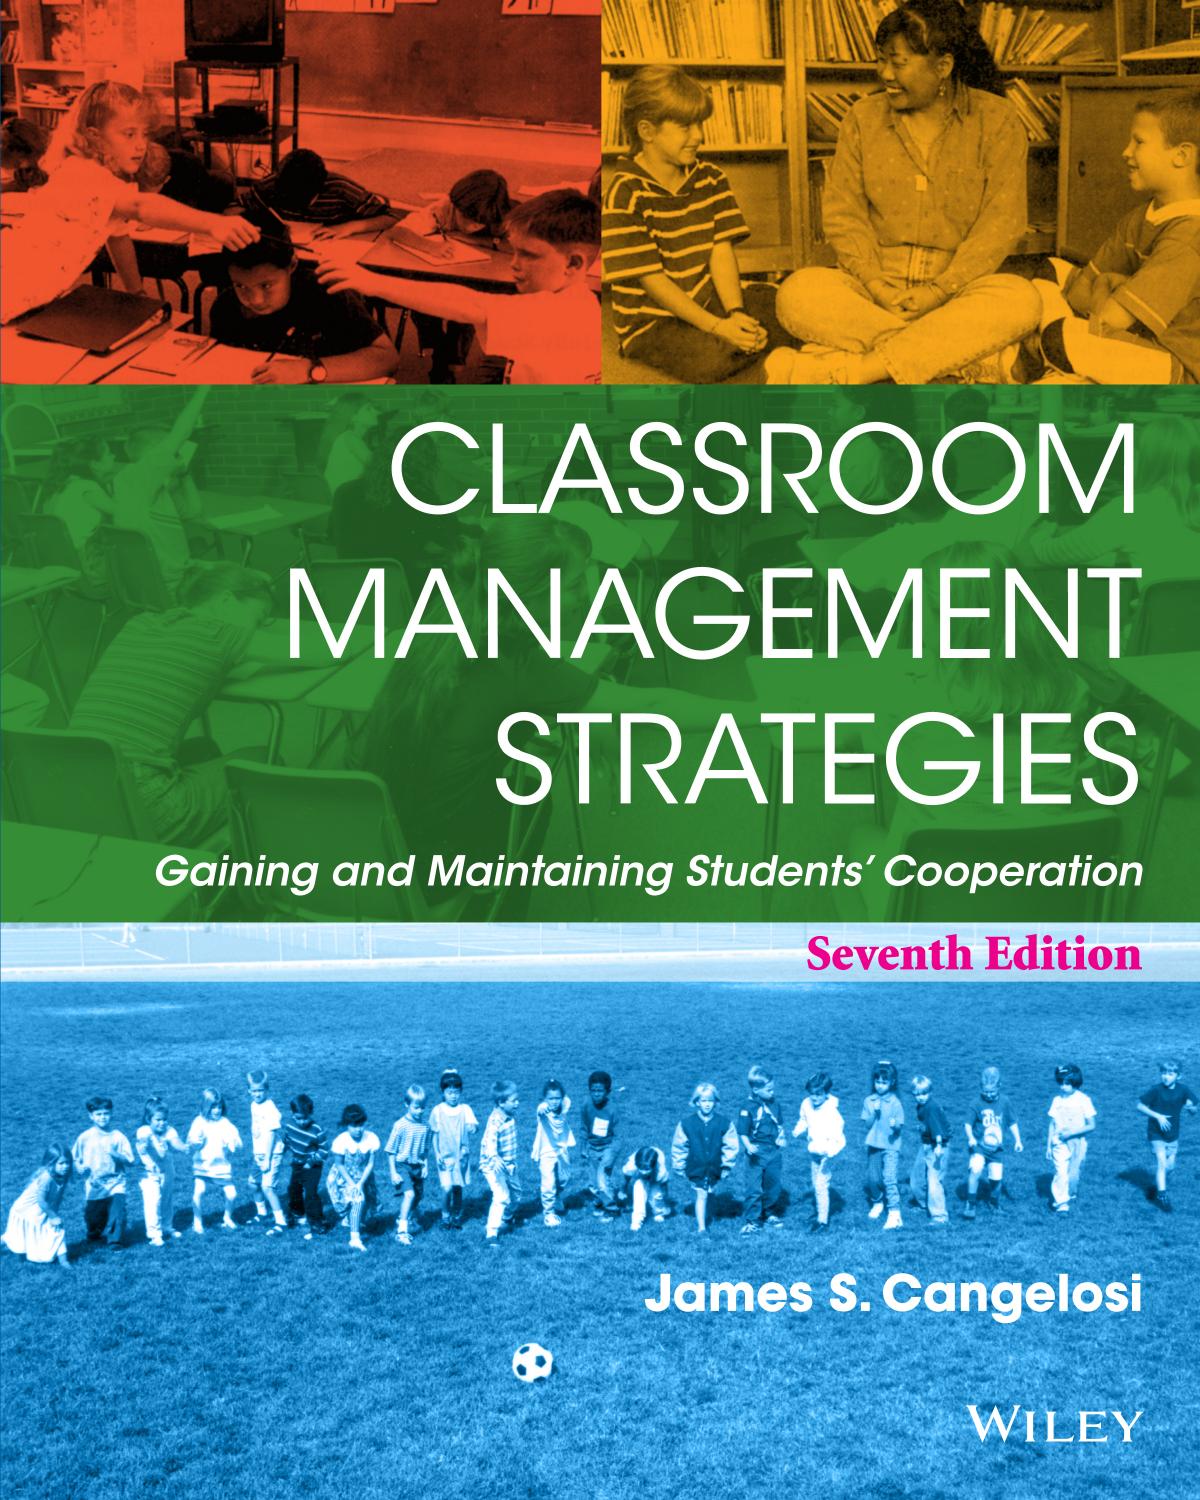 (eBook PDF)Classroom Management Strategies: Gaining and Maintaining Students' Cooperation 7th Edition by James S. Cangelosi